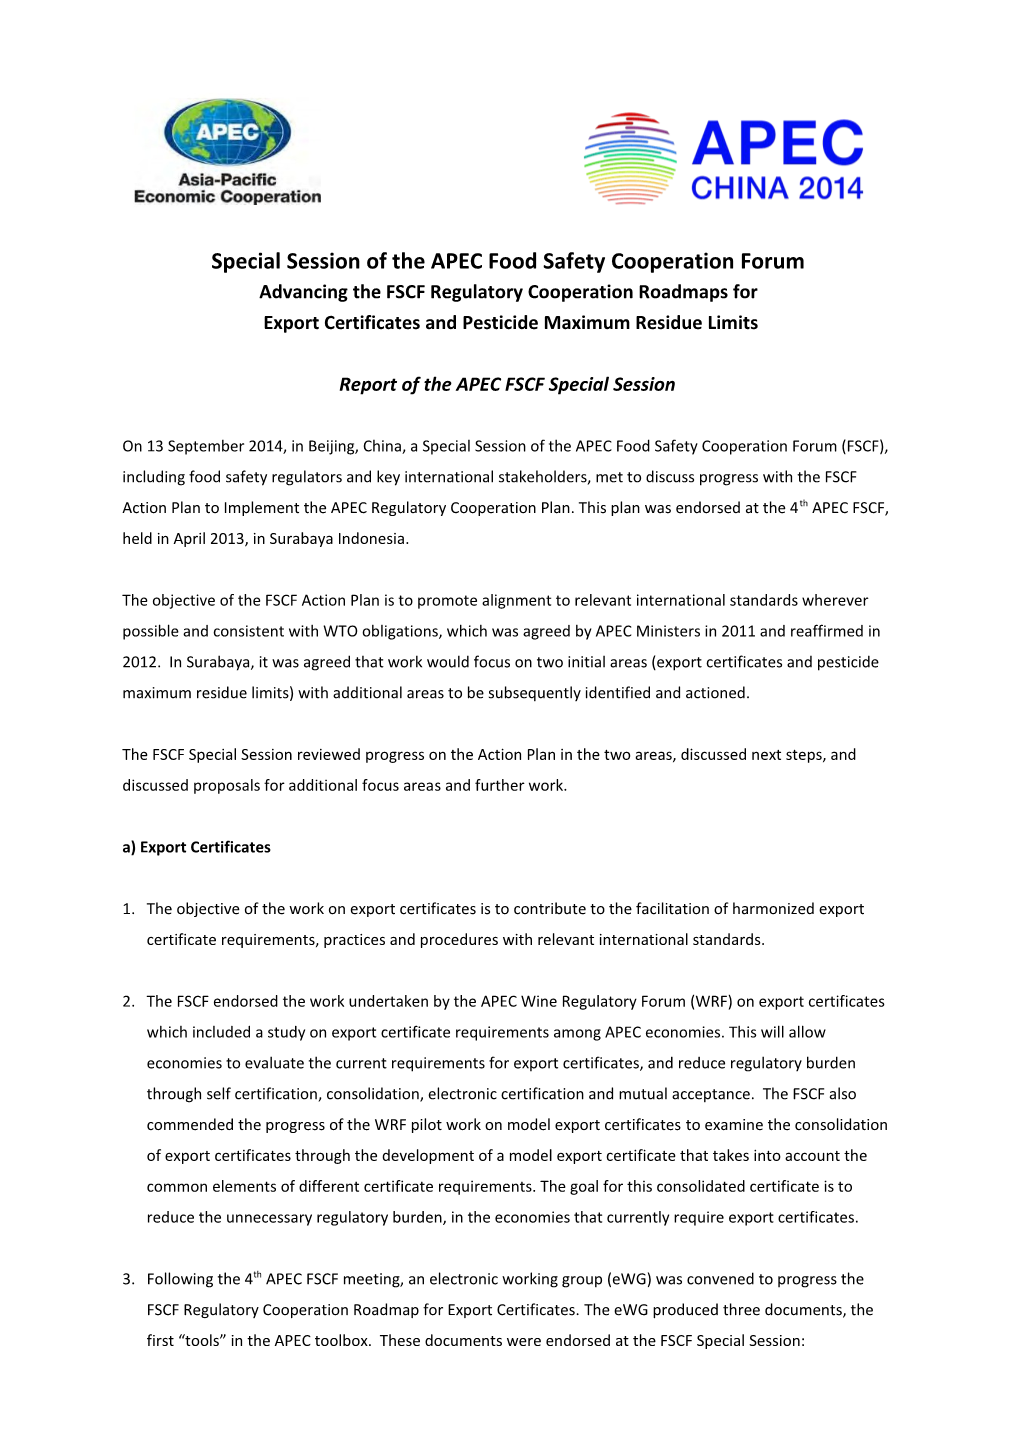 Special Session of the APEC Food Safety Cooperation Forum